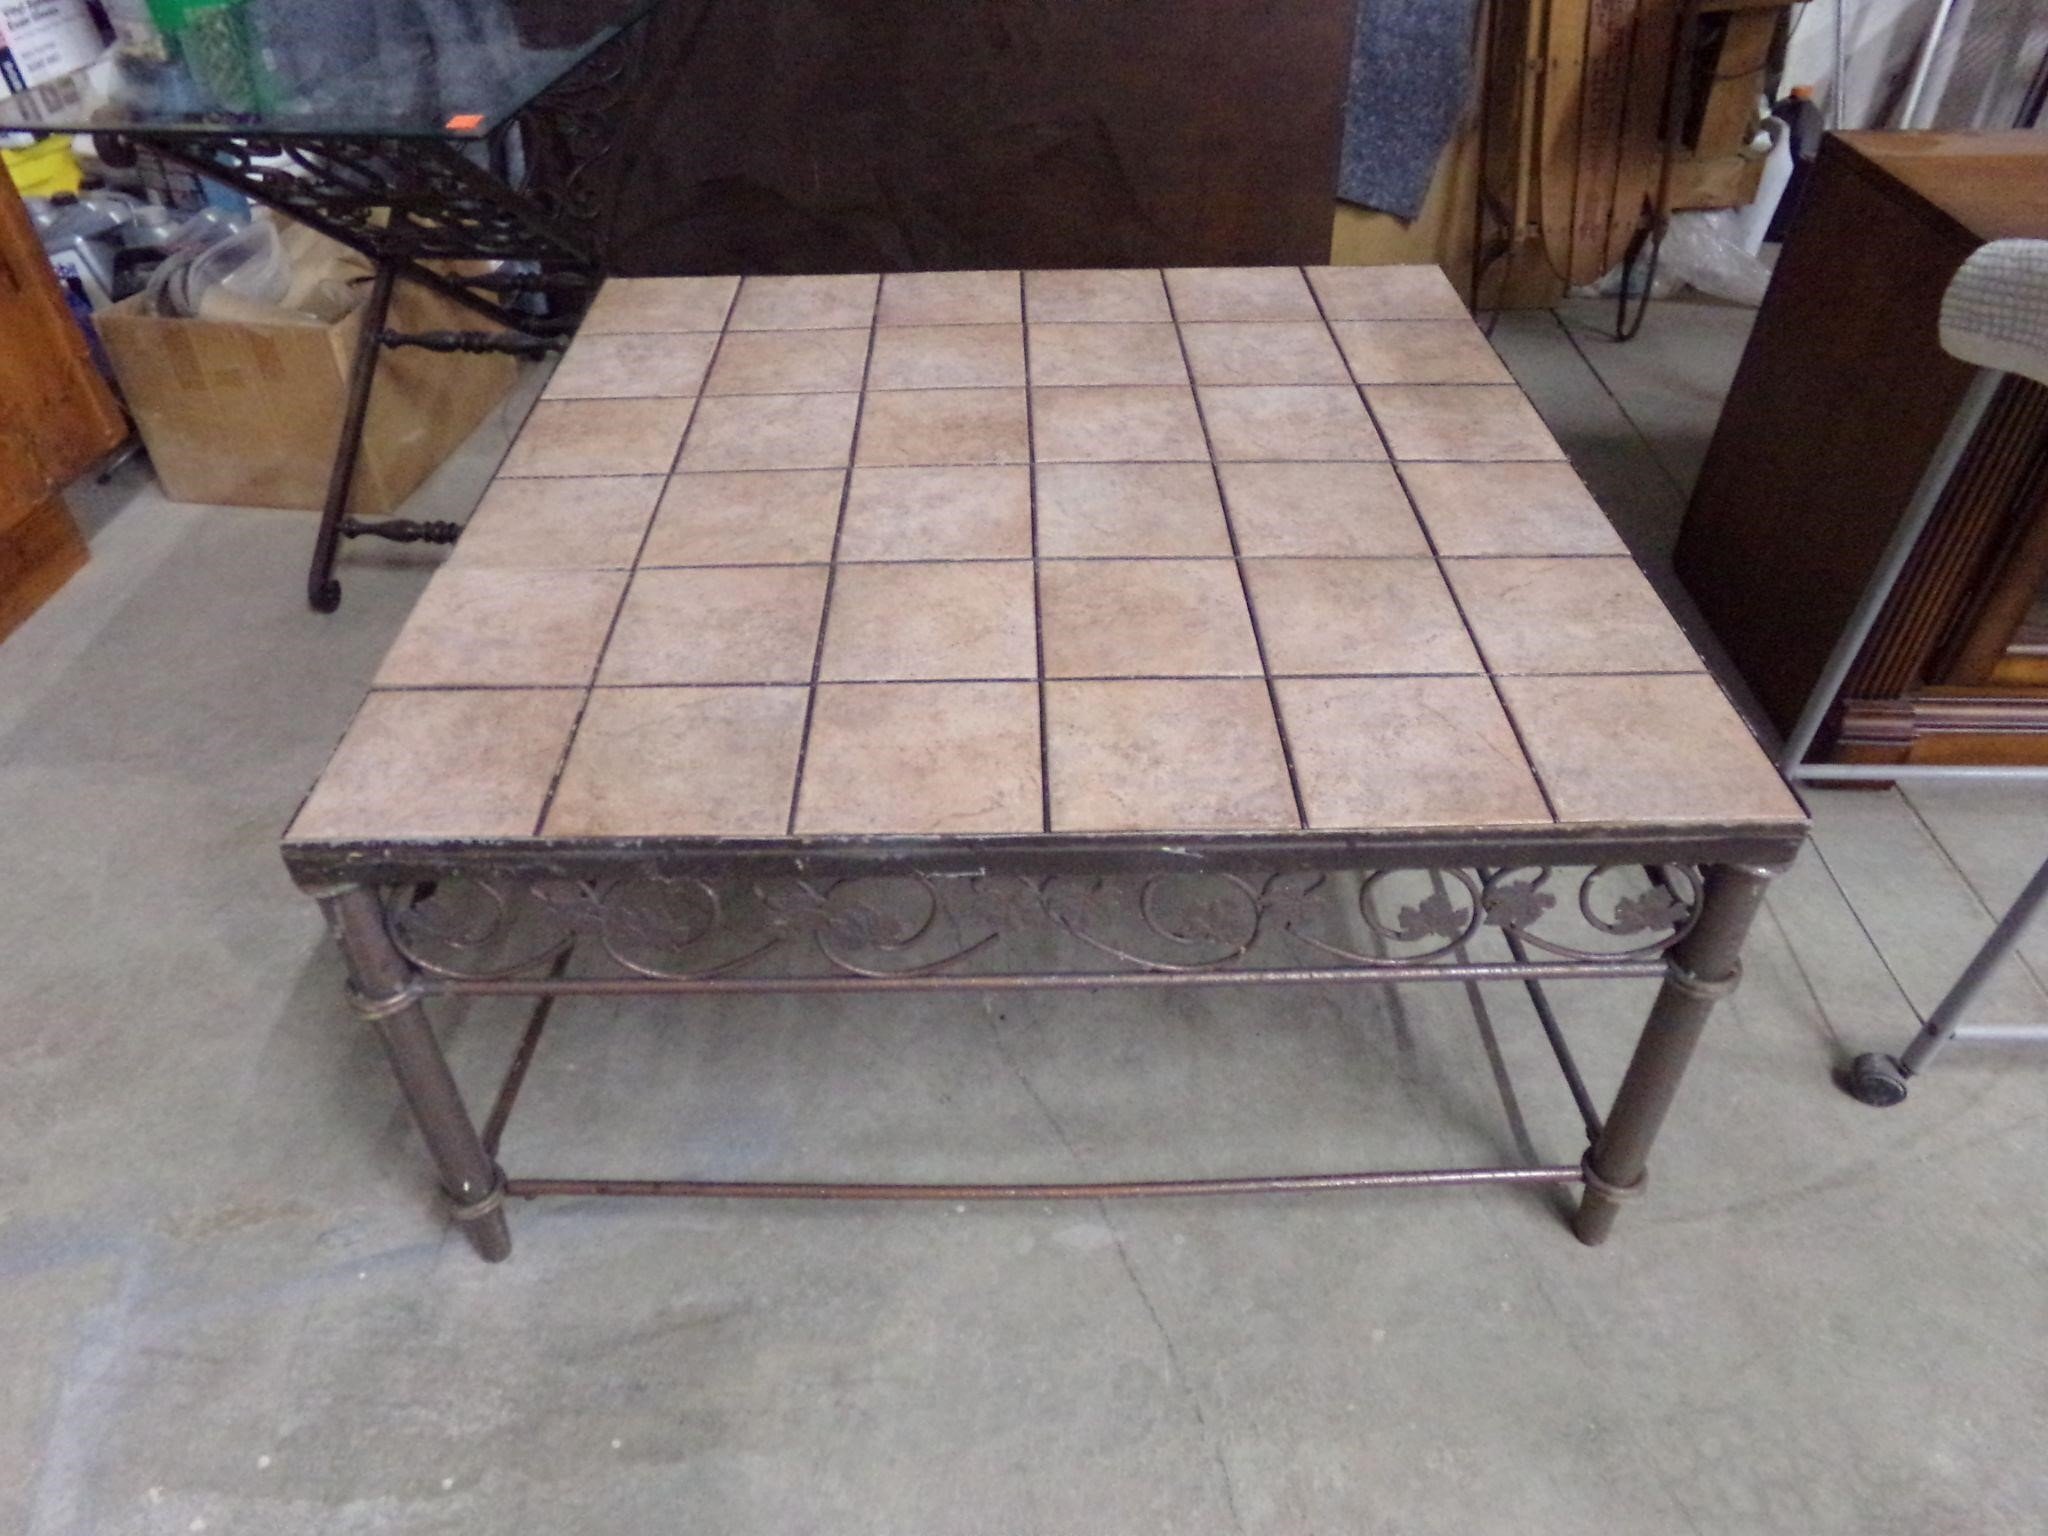 Tile top coffee table 40" square